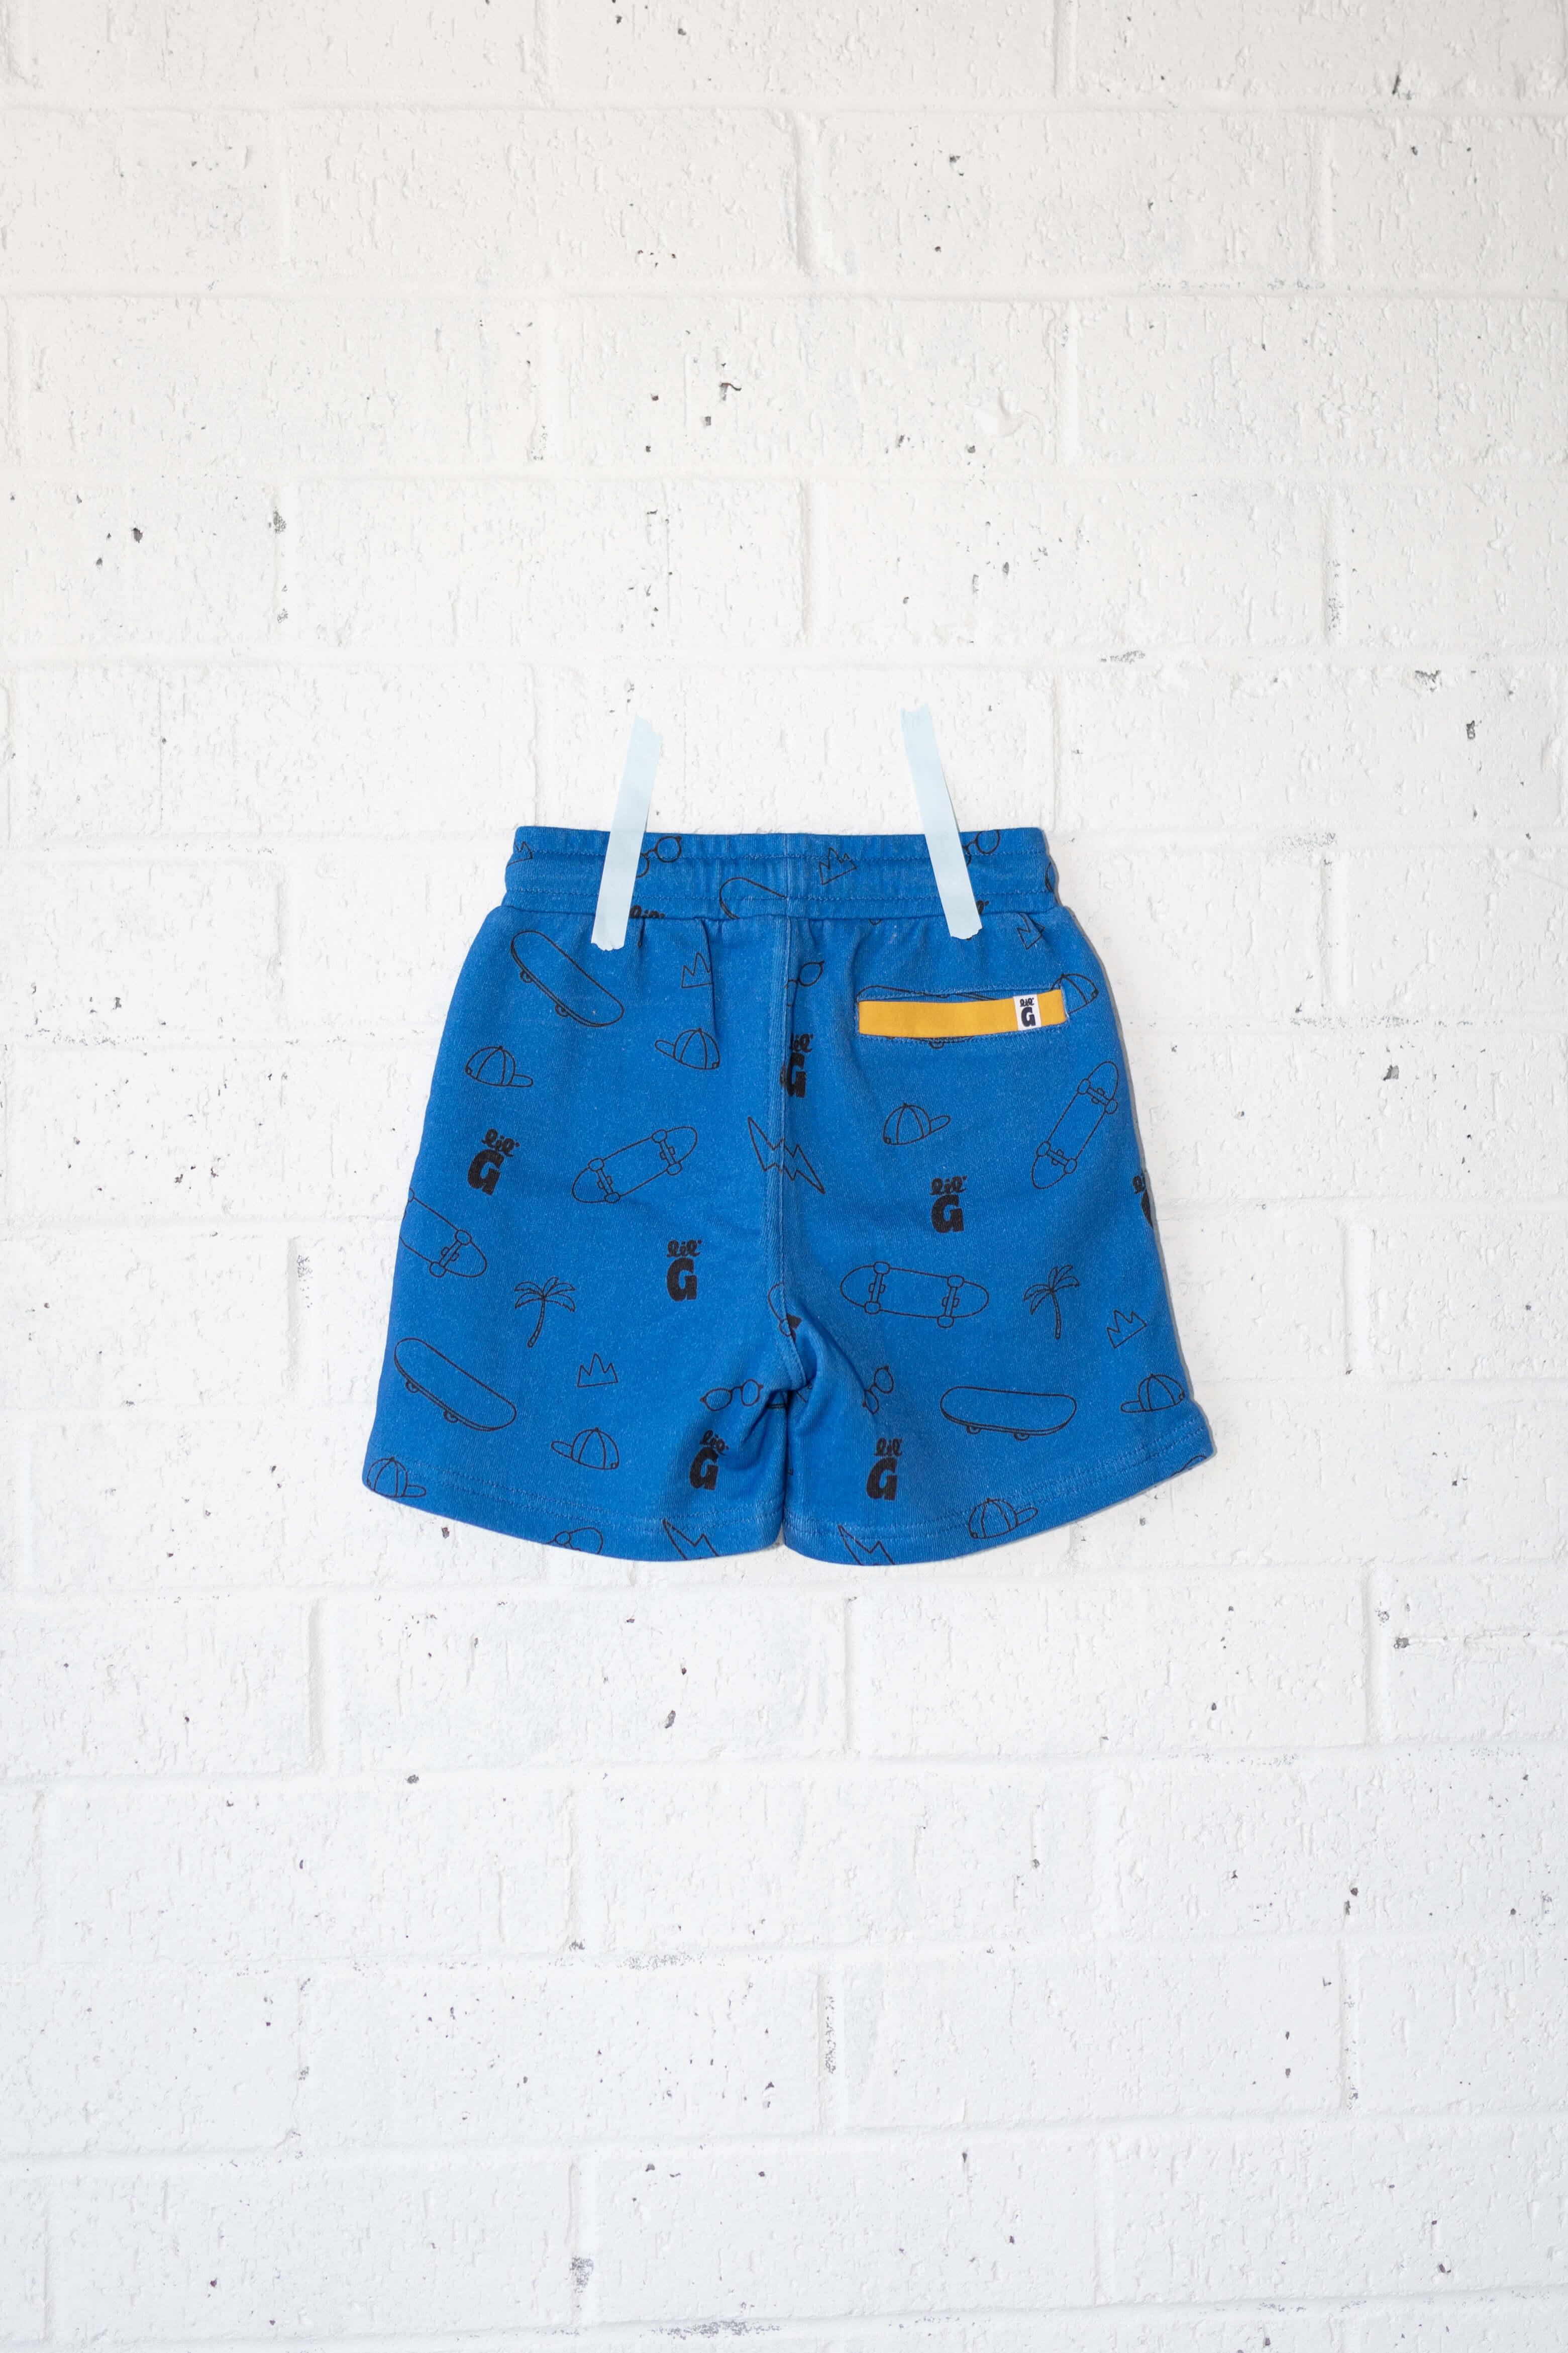 ultimate relaxo lil g blue printed short - Lil Groms Kids Co